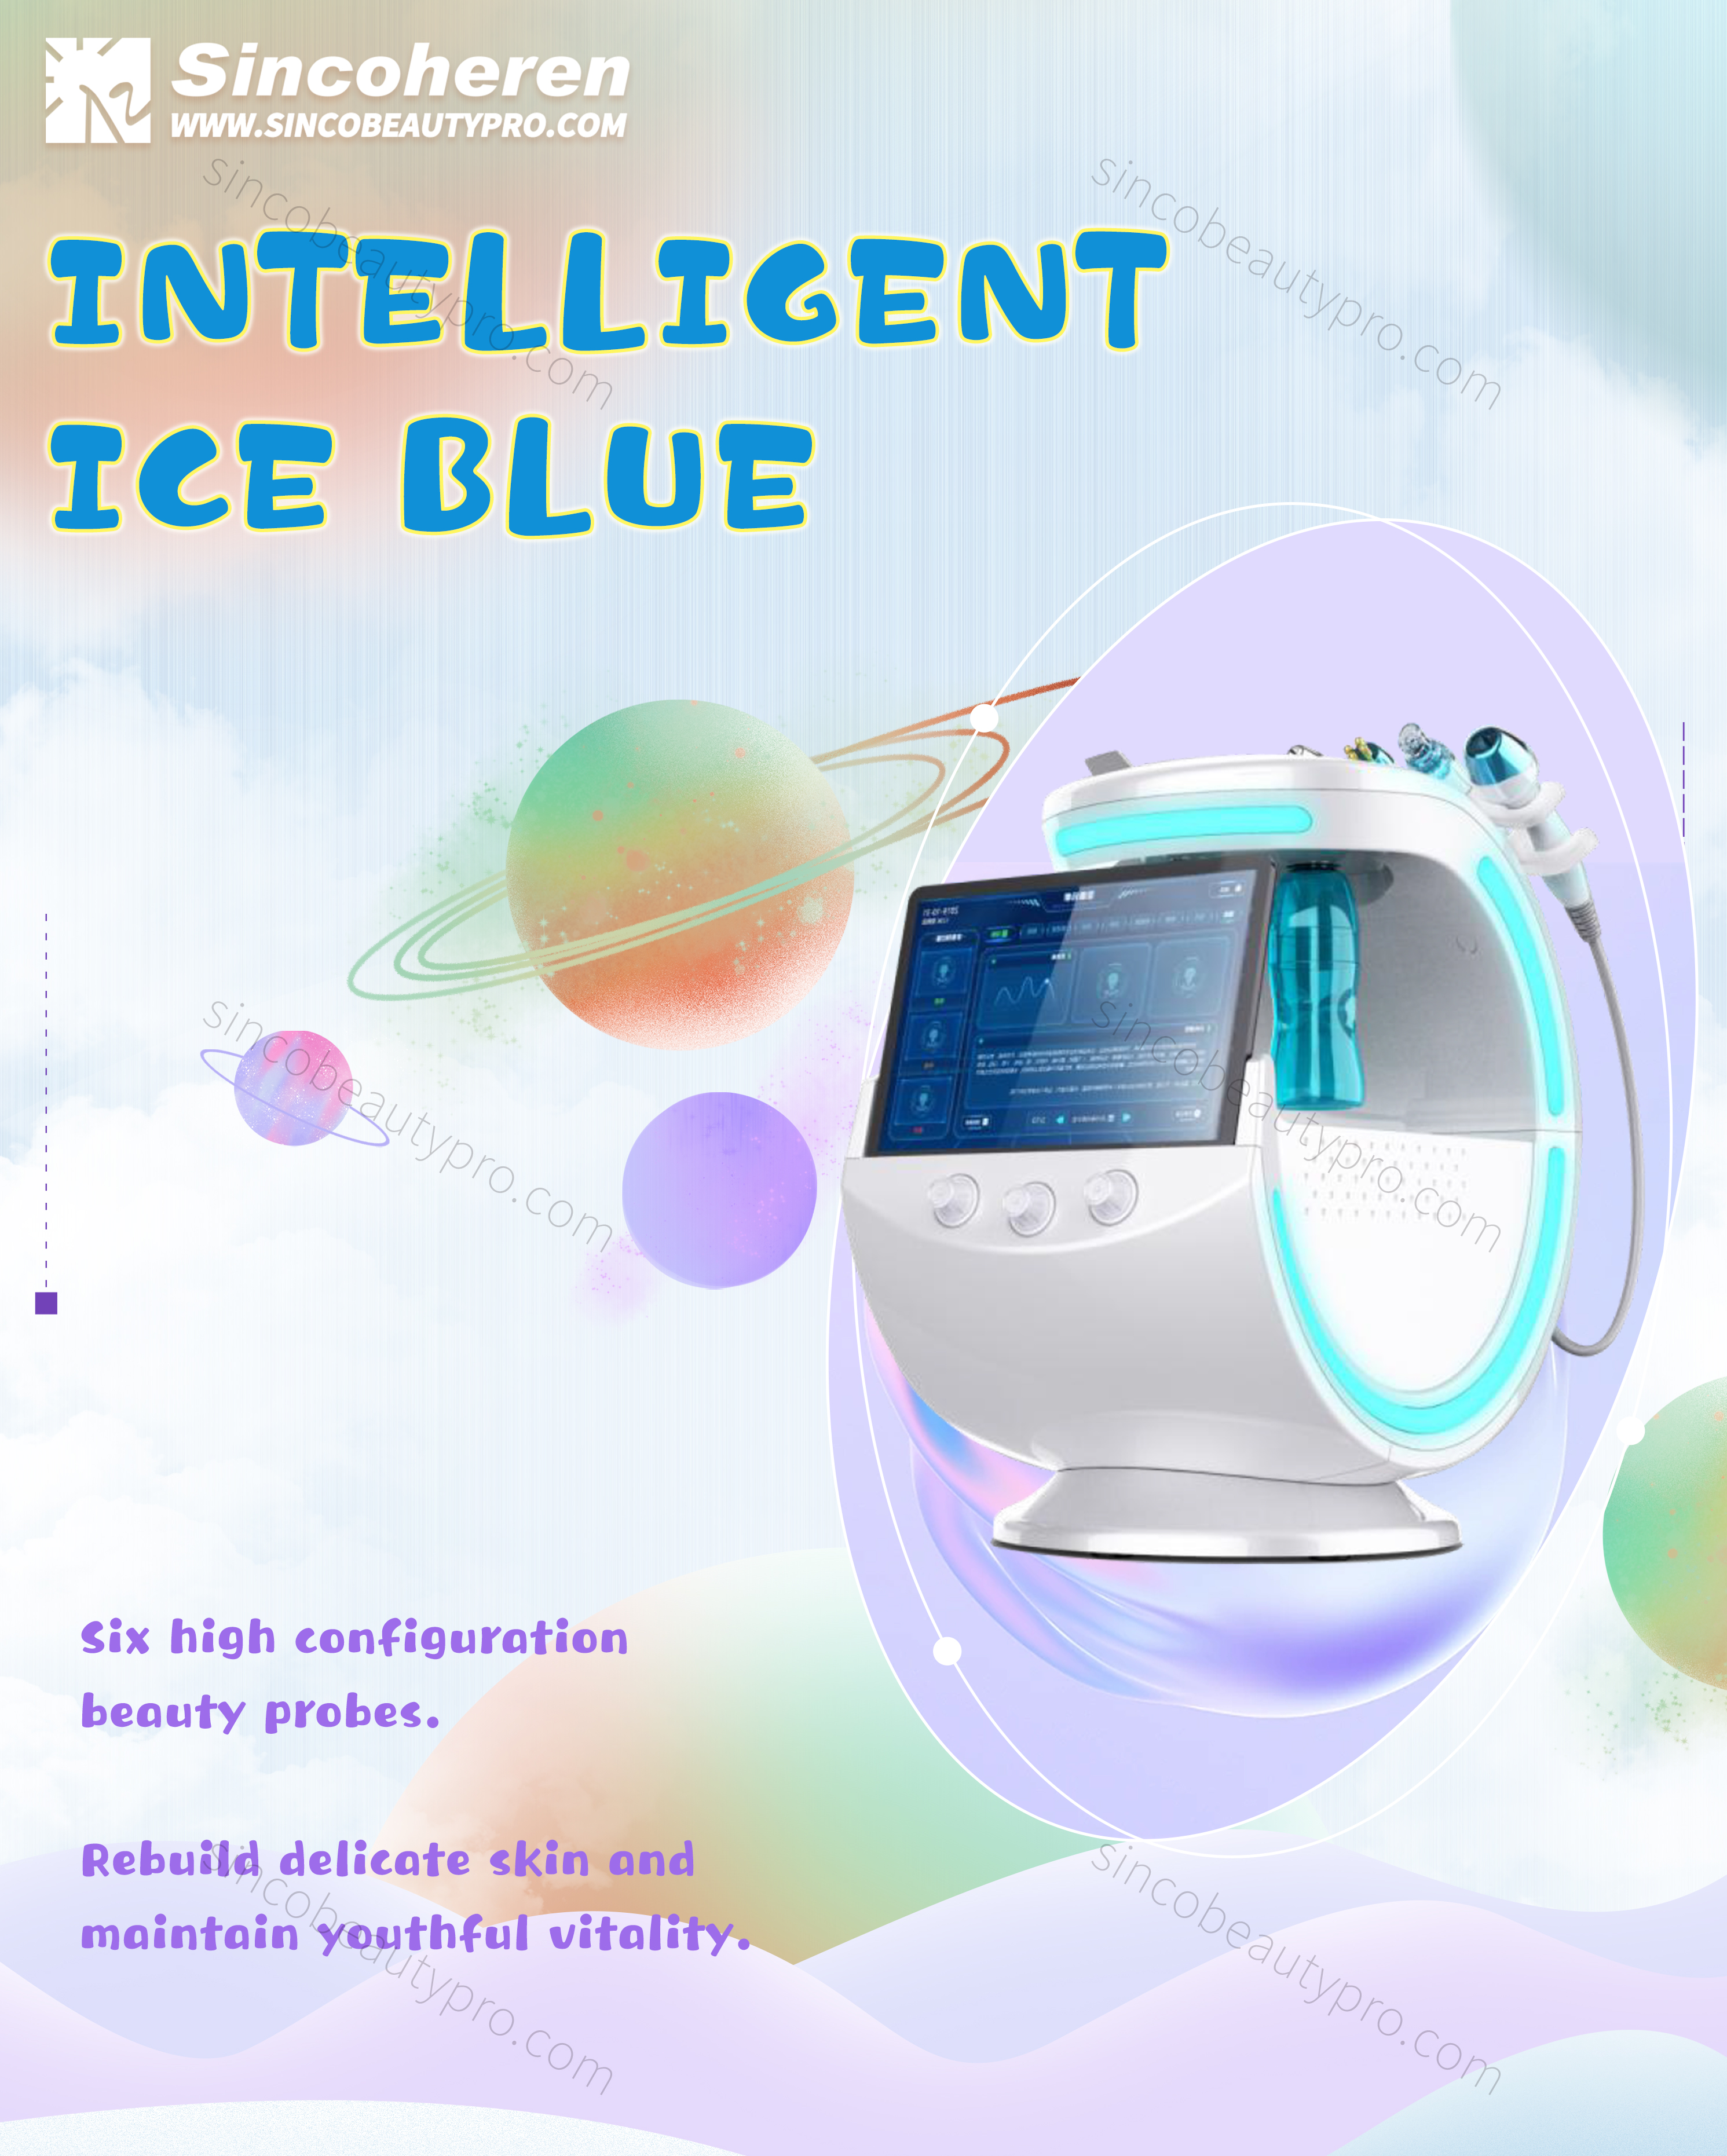 7in1 Portable The Intelligent Ice Blue Skin Management System Pro Ho lokolloa